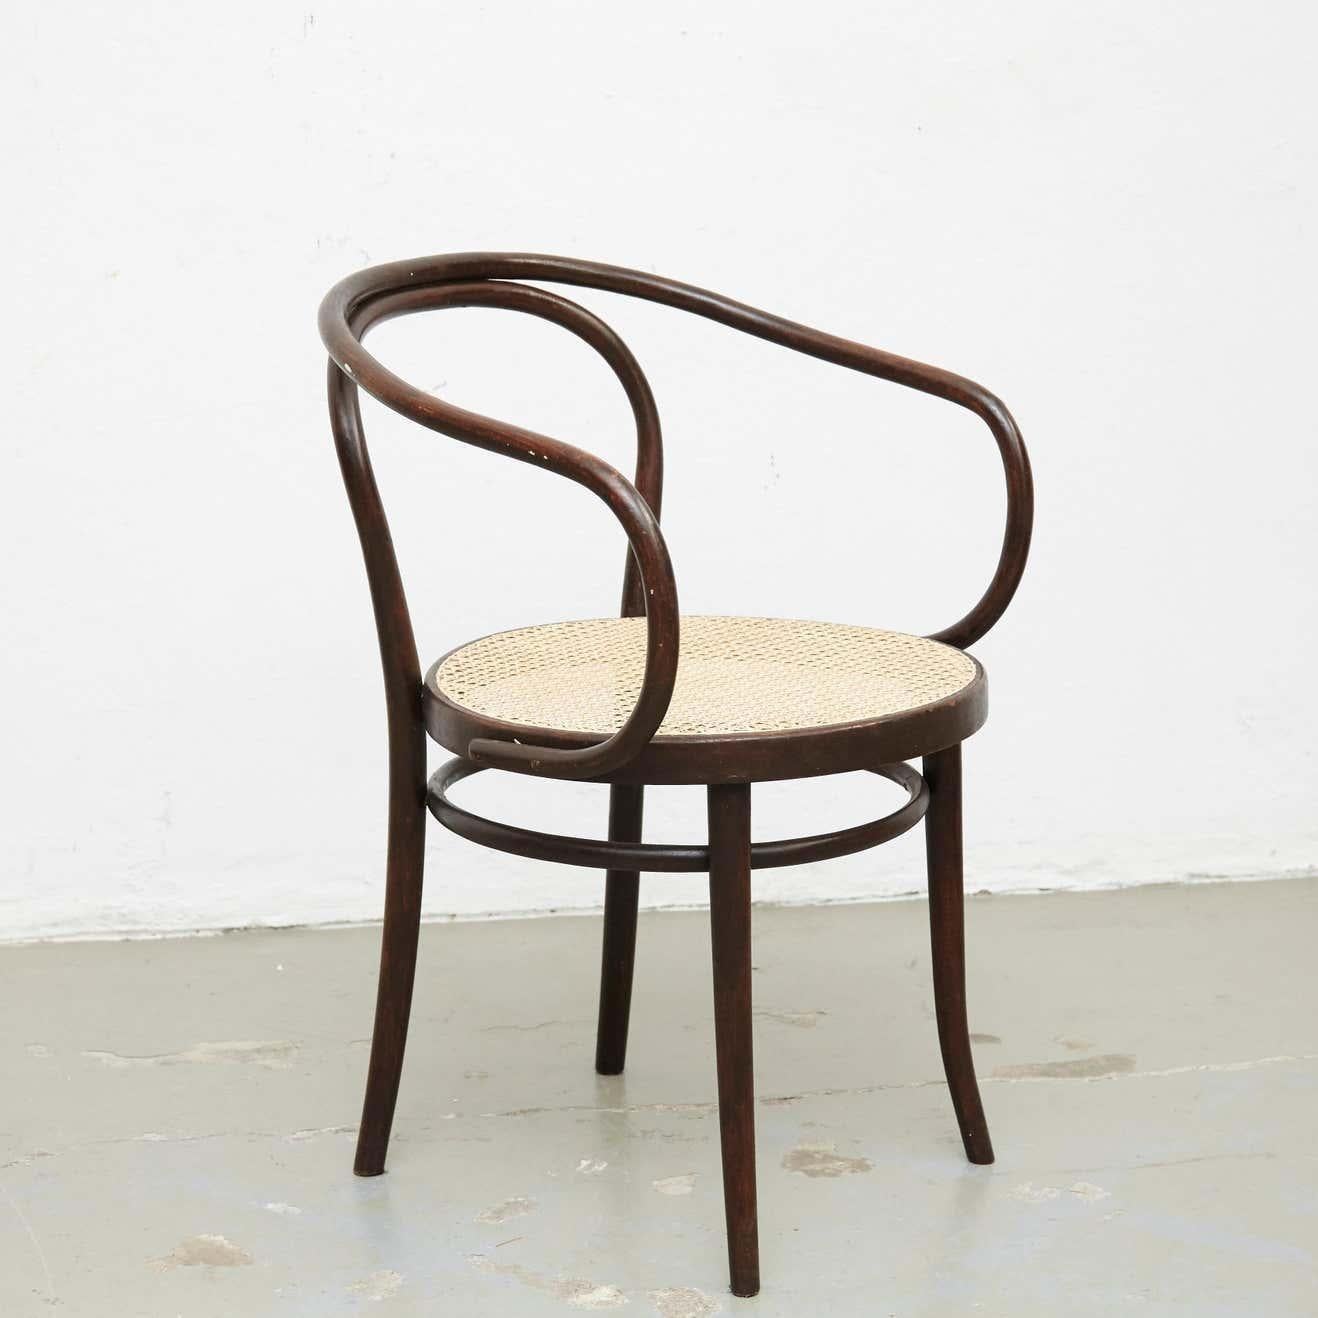 Chair designed by Ligna in the style of Thonet, circa 1940.
Manufactured in Czechoslovakia.
This piece has an attribution mark such as a manufacturer’s label.

The design of this bentwood armchair dates from 1900. This chair was a favorite of